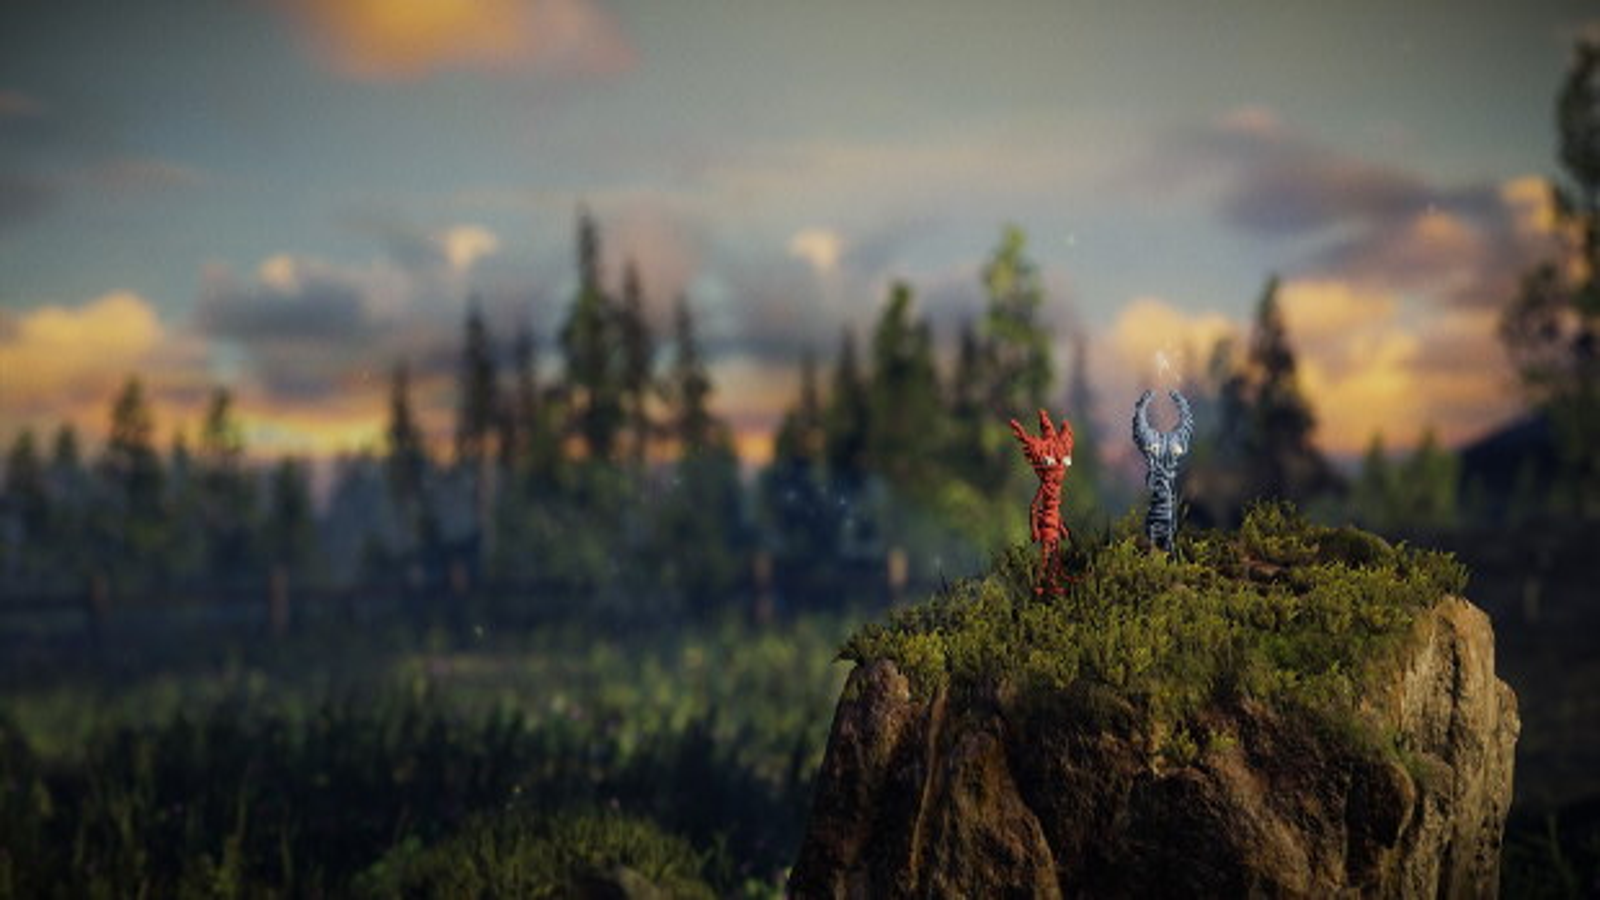 Unravel 2 is out now